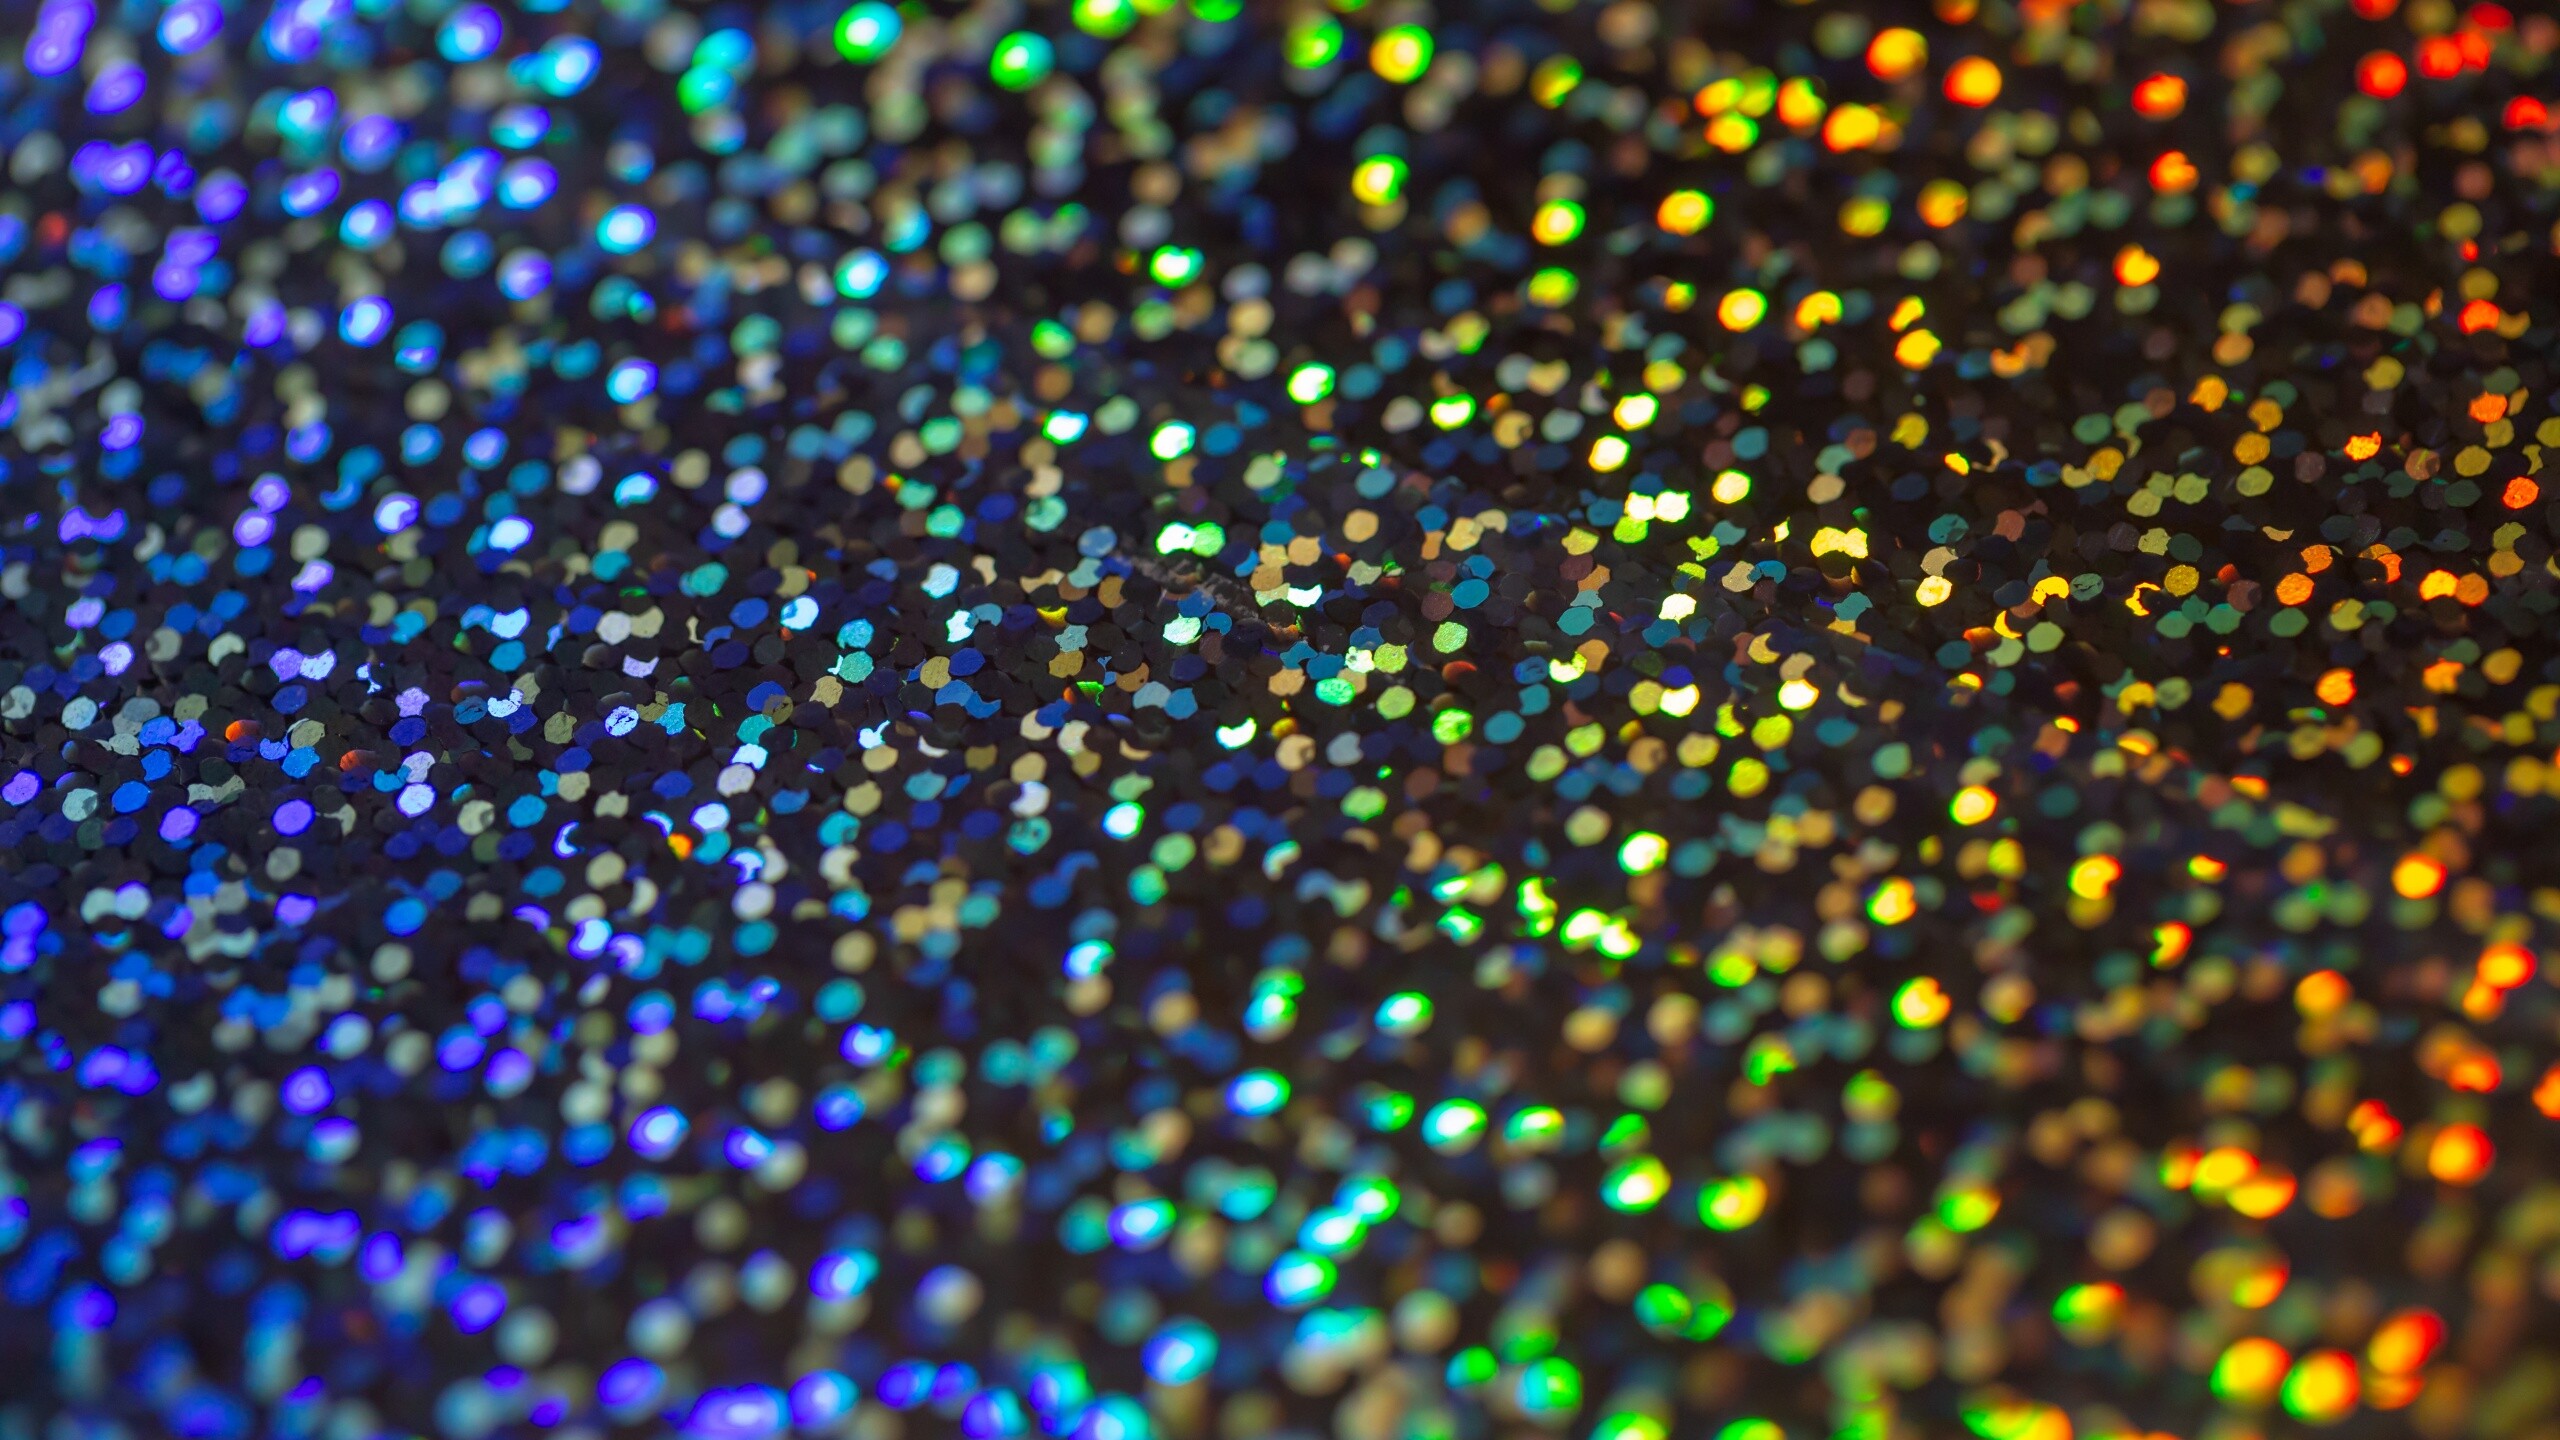 Rainbow glitter texture, Multicolored beauty, Shimmering abstract, Captivating focus, 2560x1440 HD Desktop